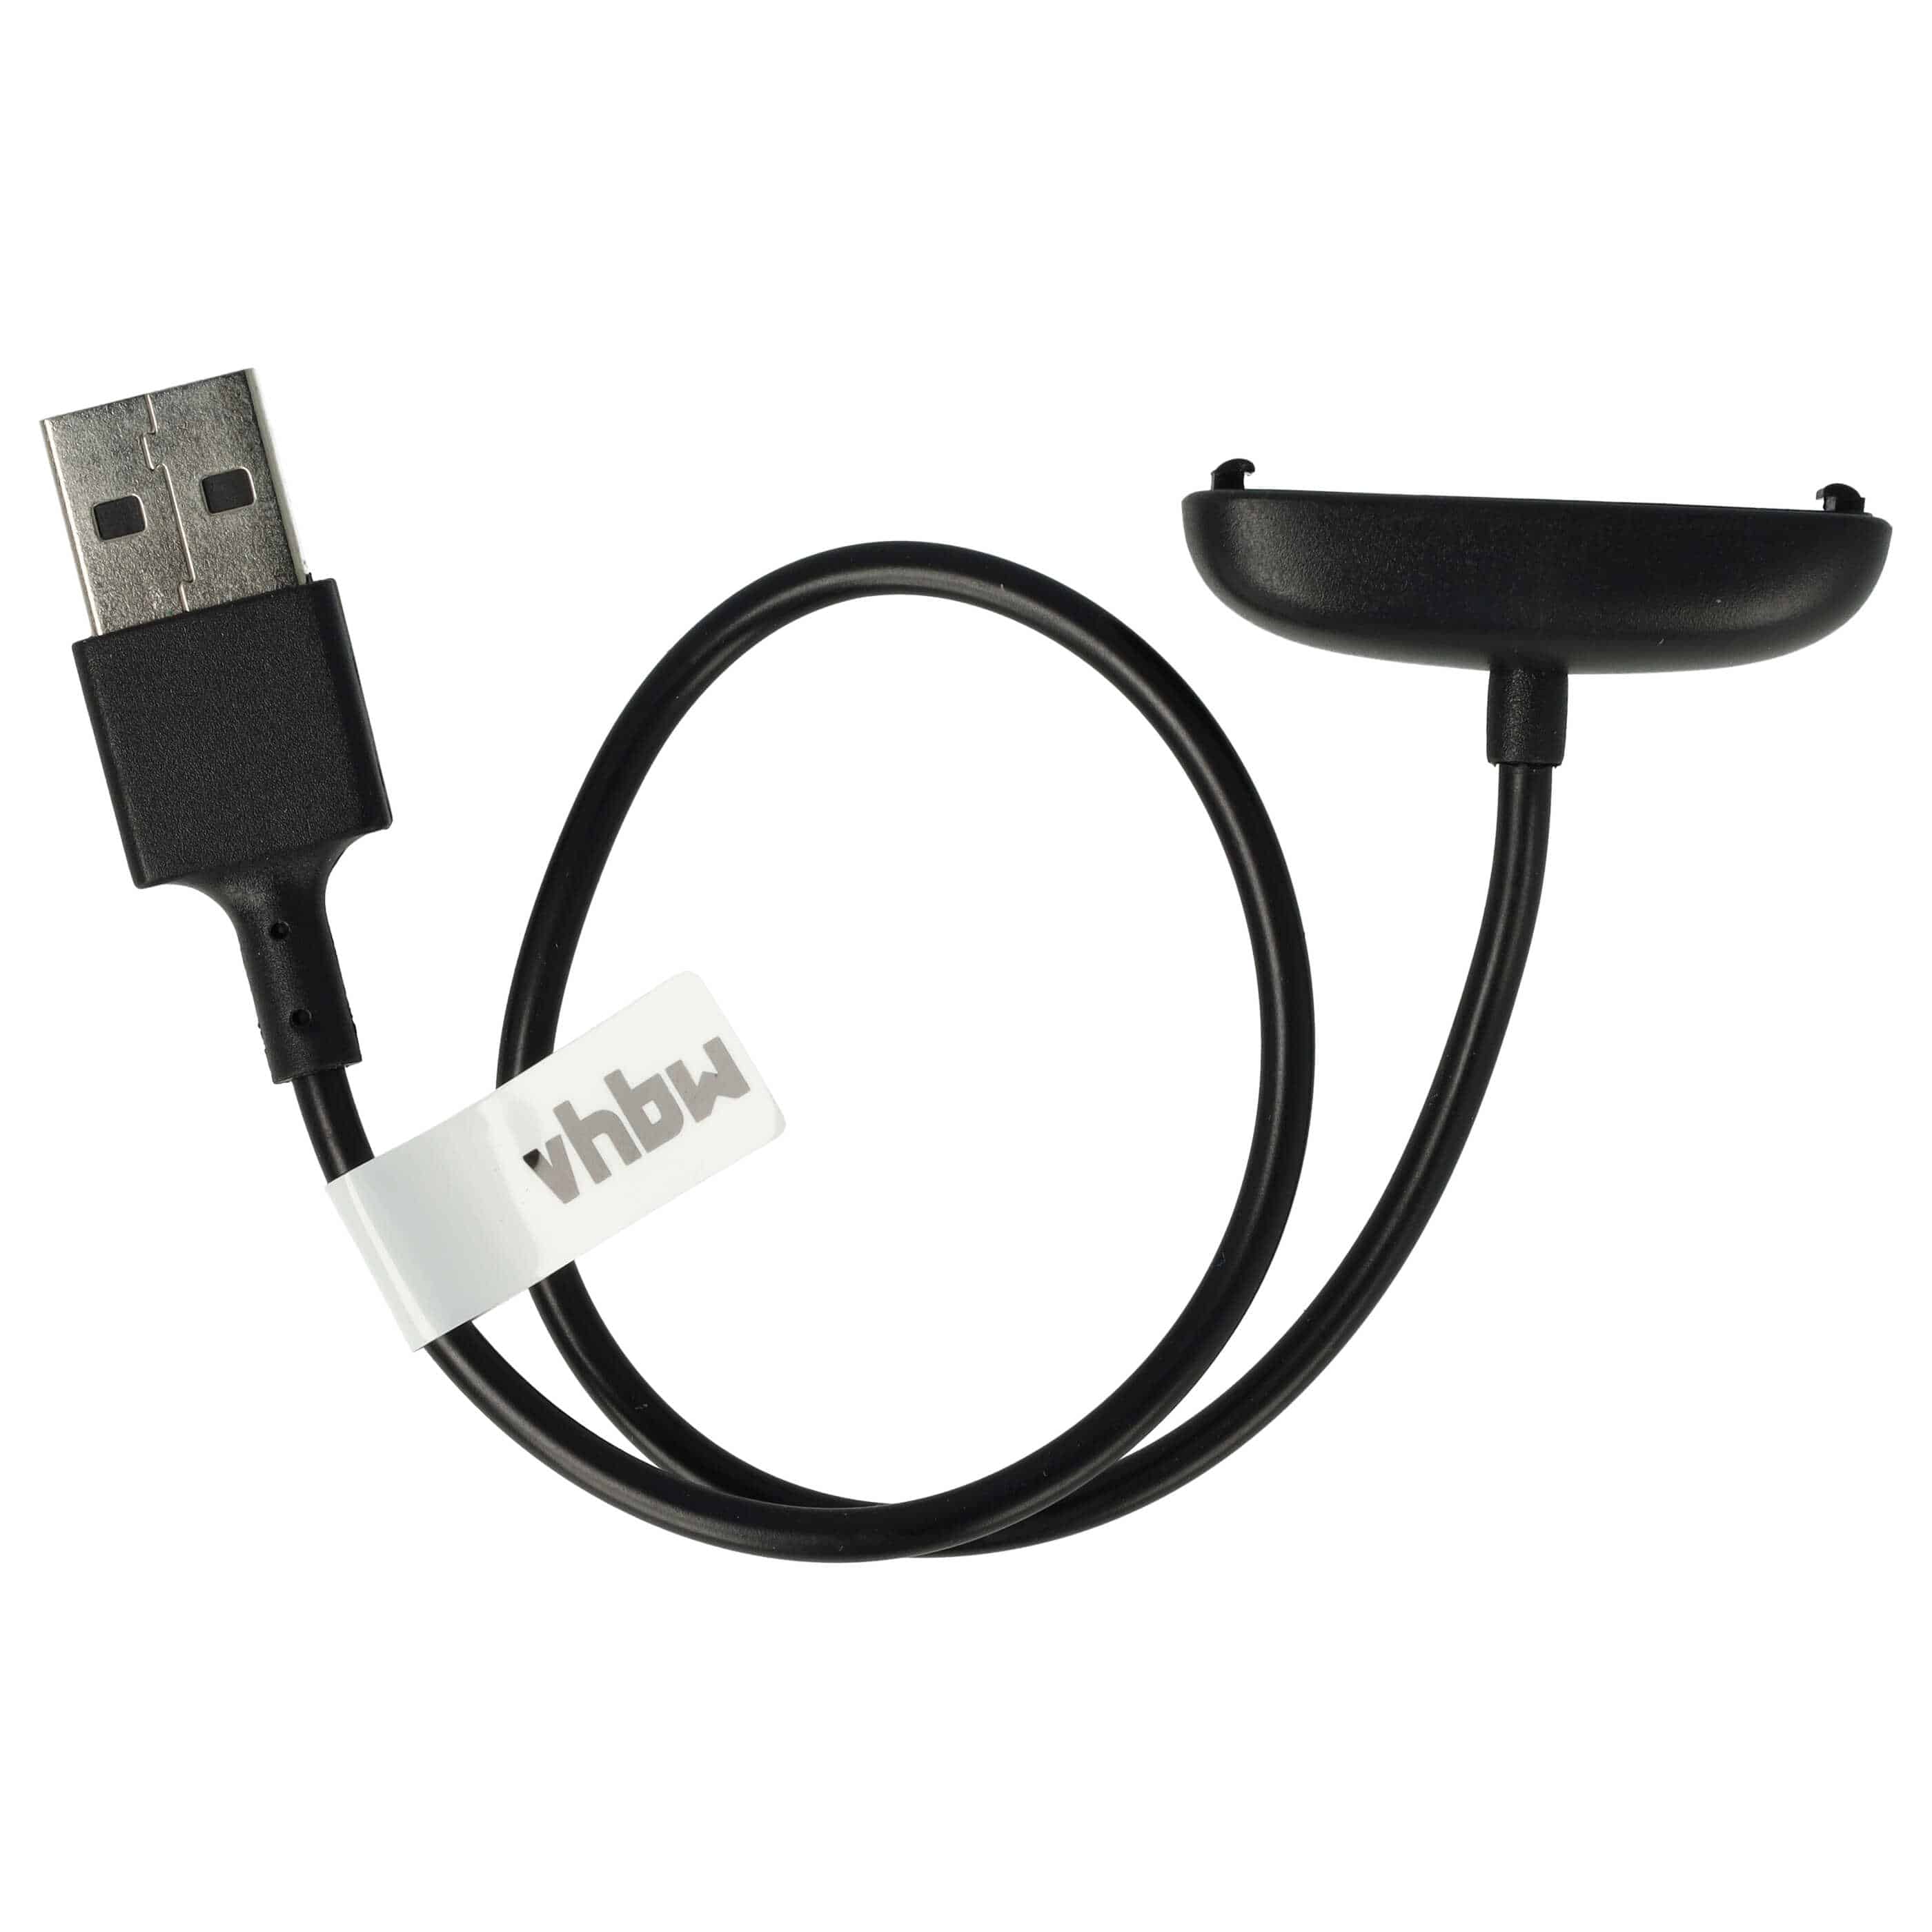 Charging Cable suitable for 3, 2 Fitbit Ace Fitness Tracker - USB A Cable, 30cm, black